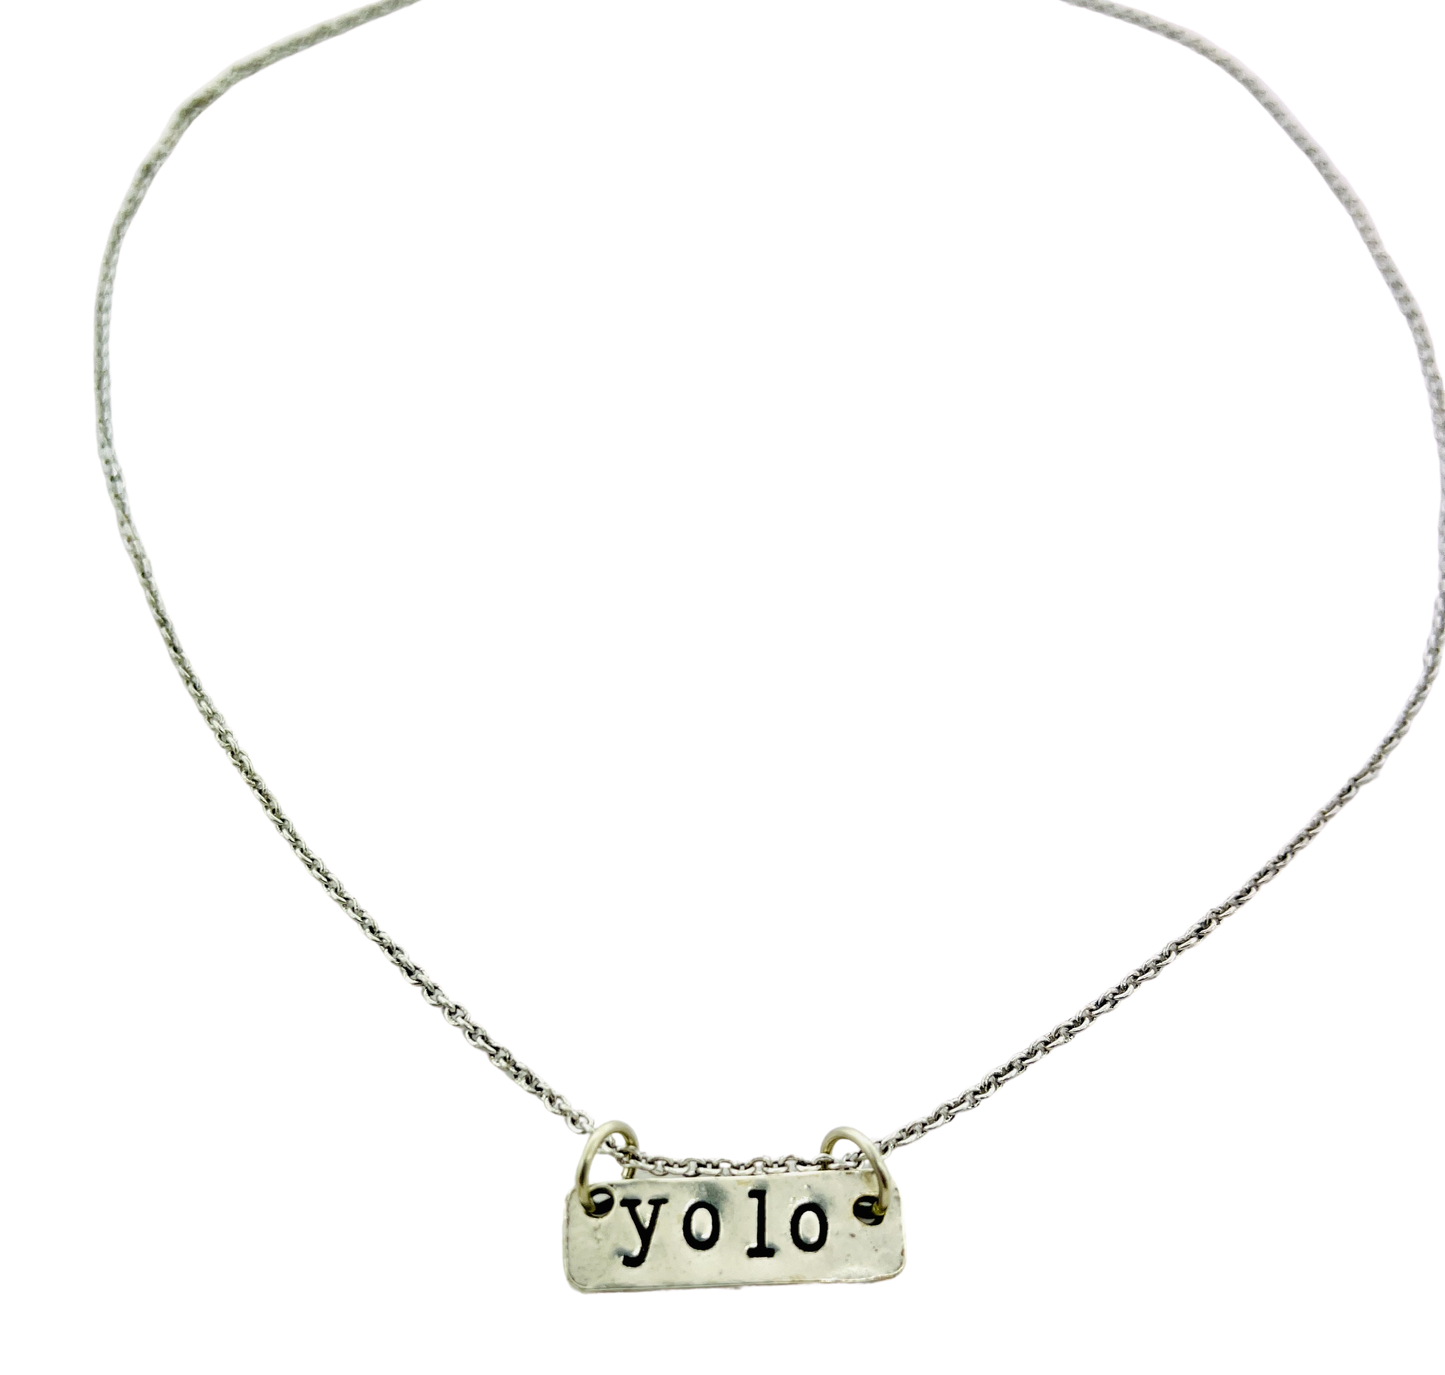 Yolo Hand Stamped Necklace